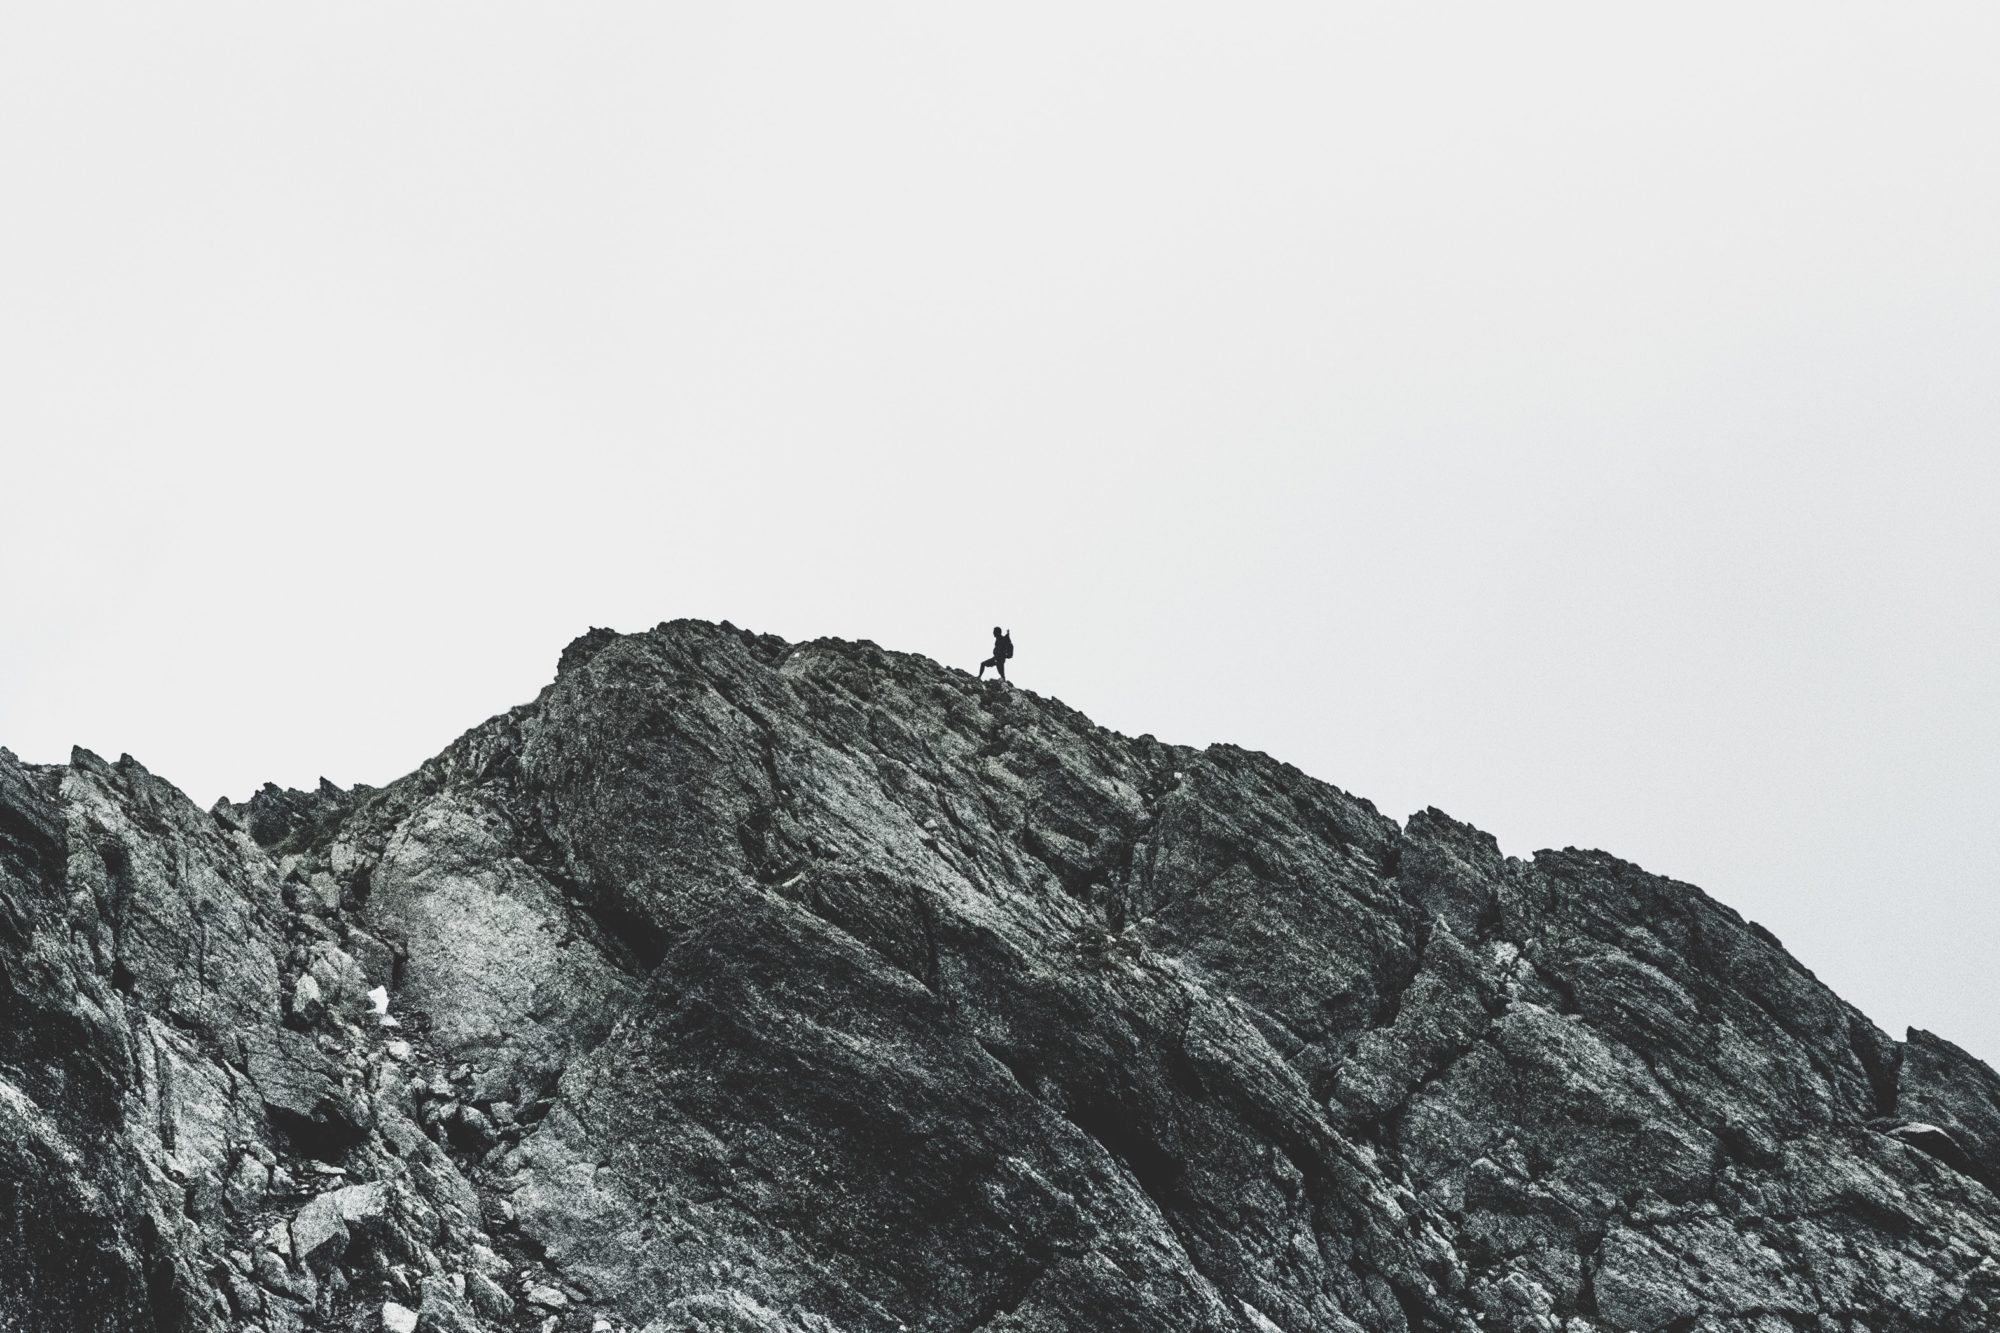 A man standing on a mountain